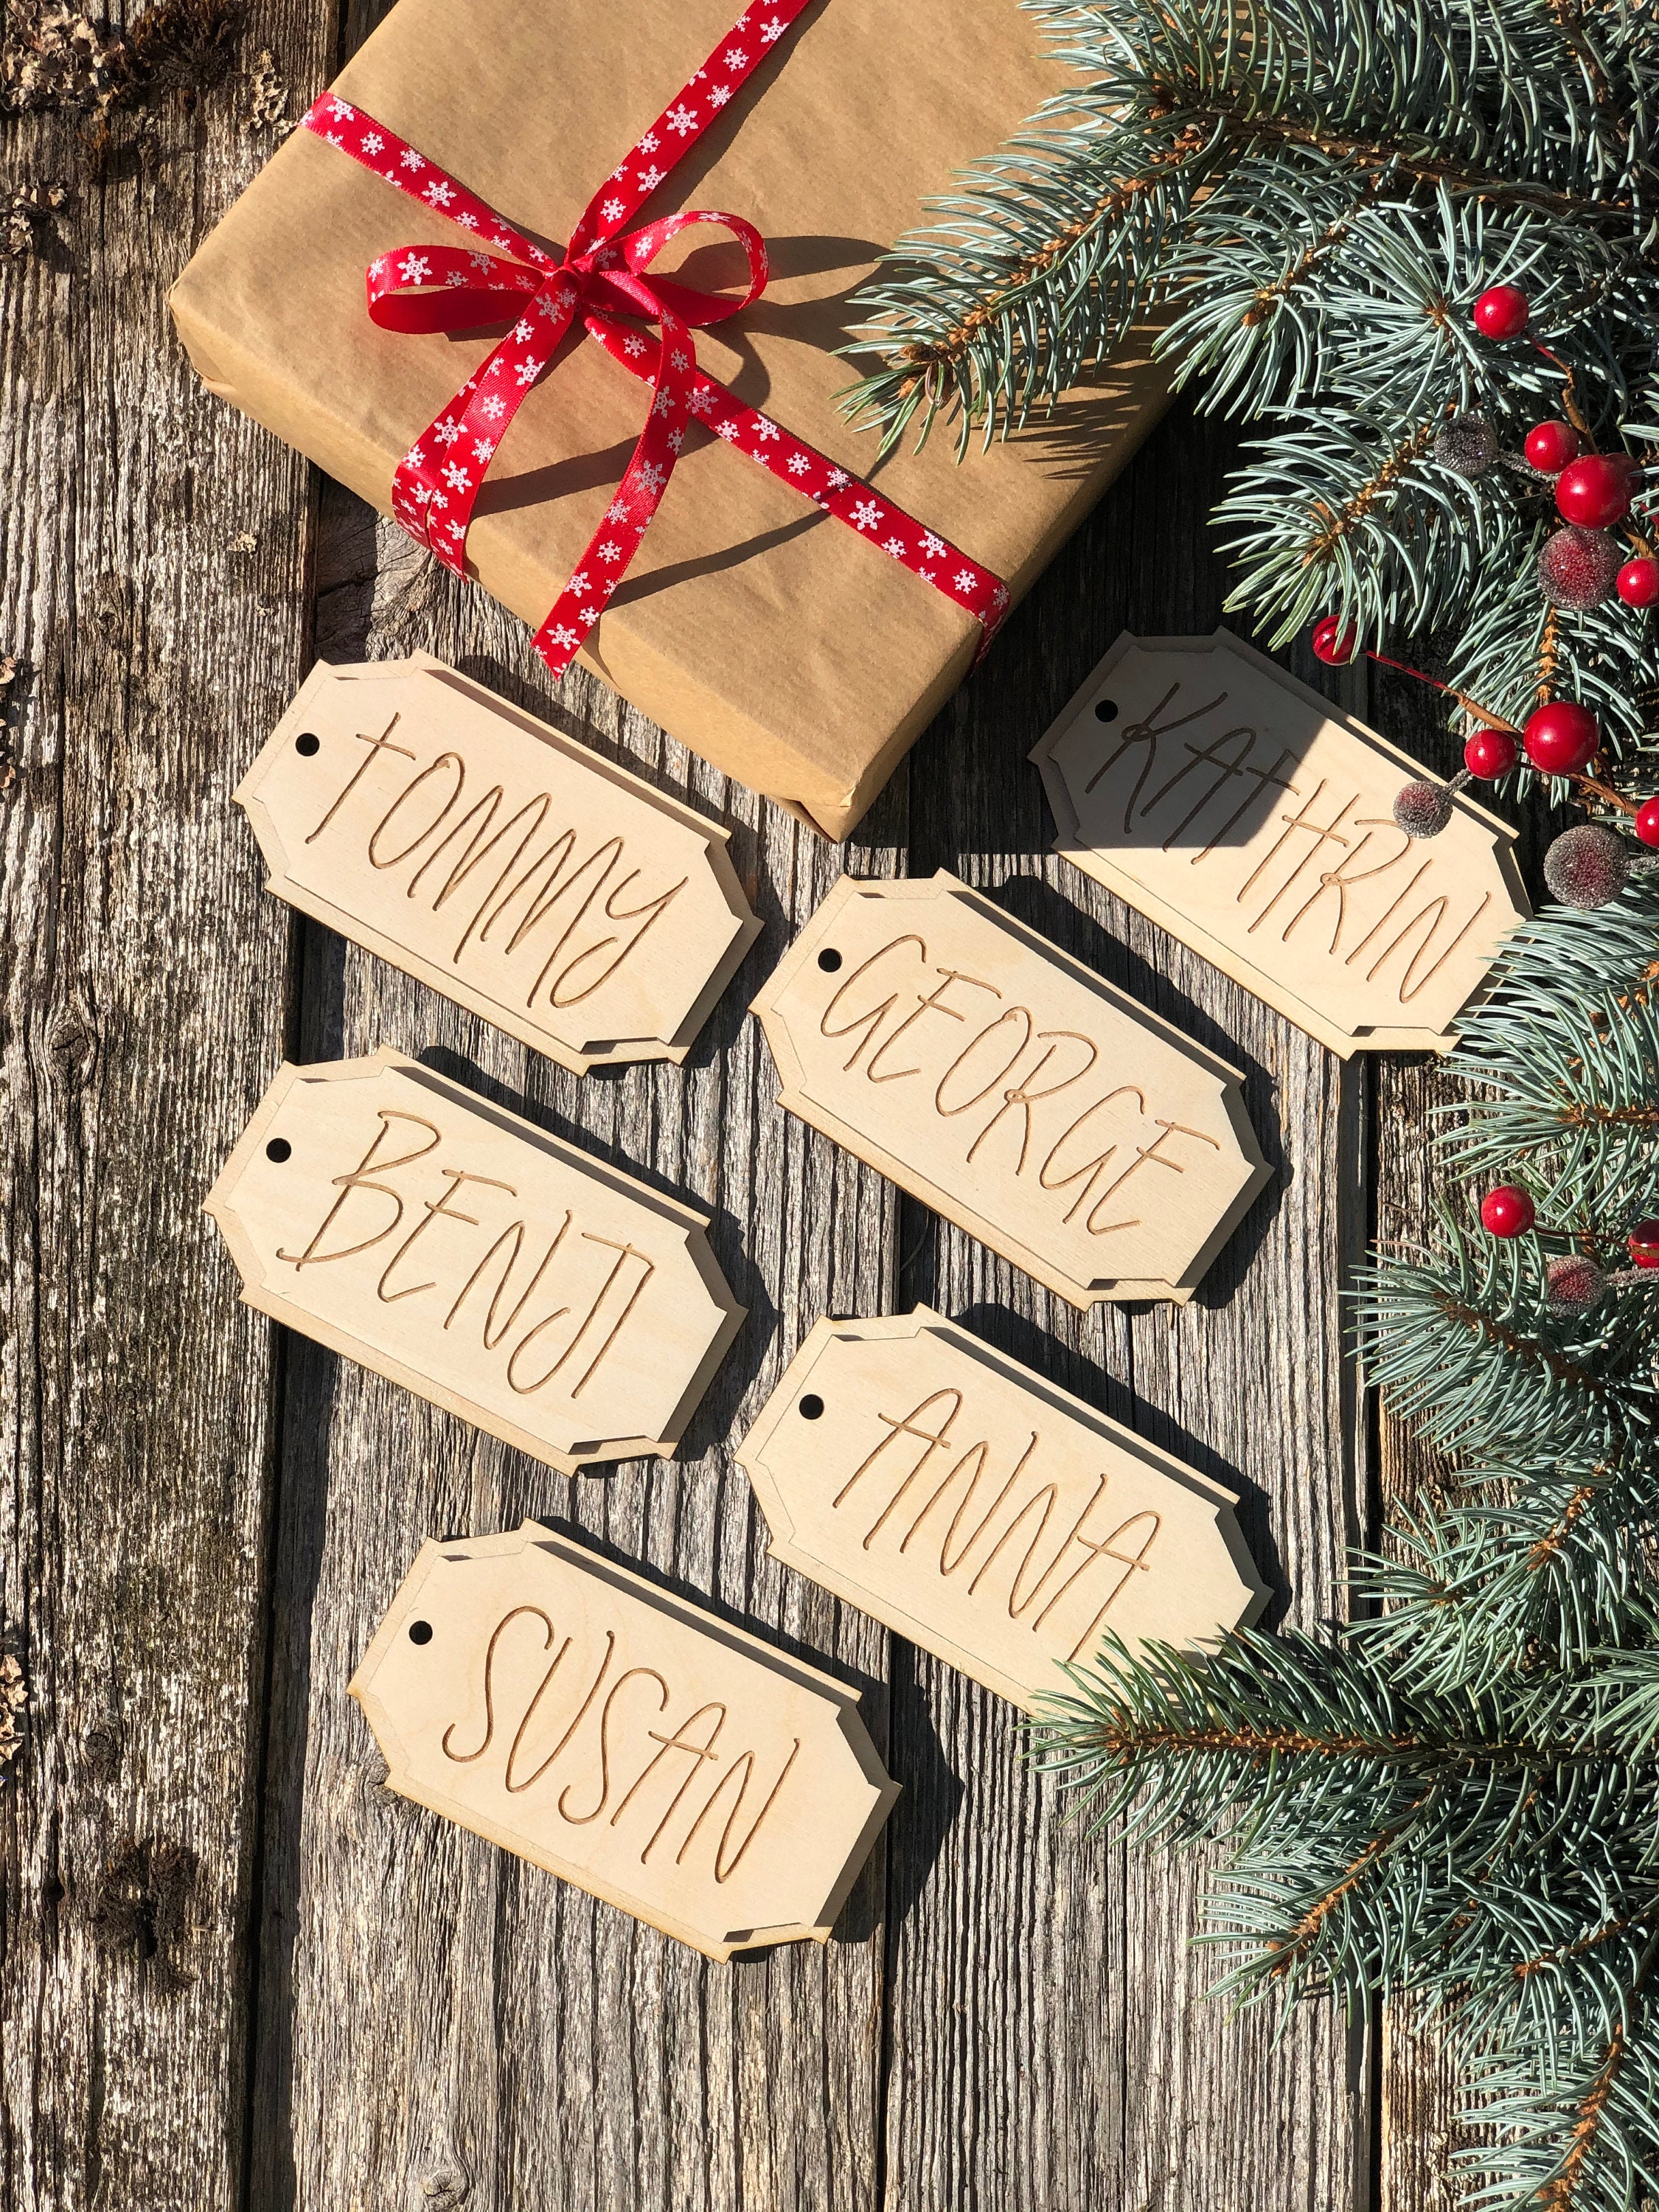 4 x Christmas Wooden Gift Tags Various Designs Xmas Presents Wrapping